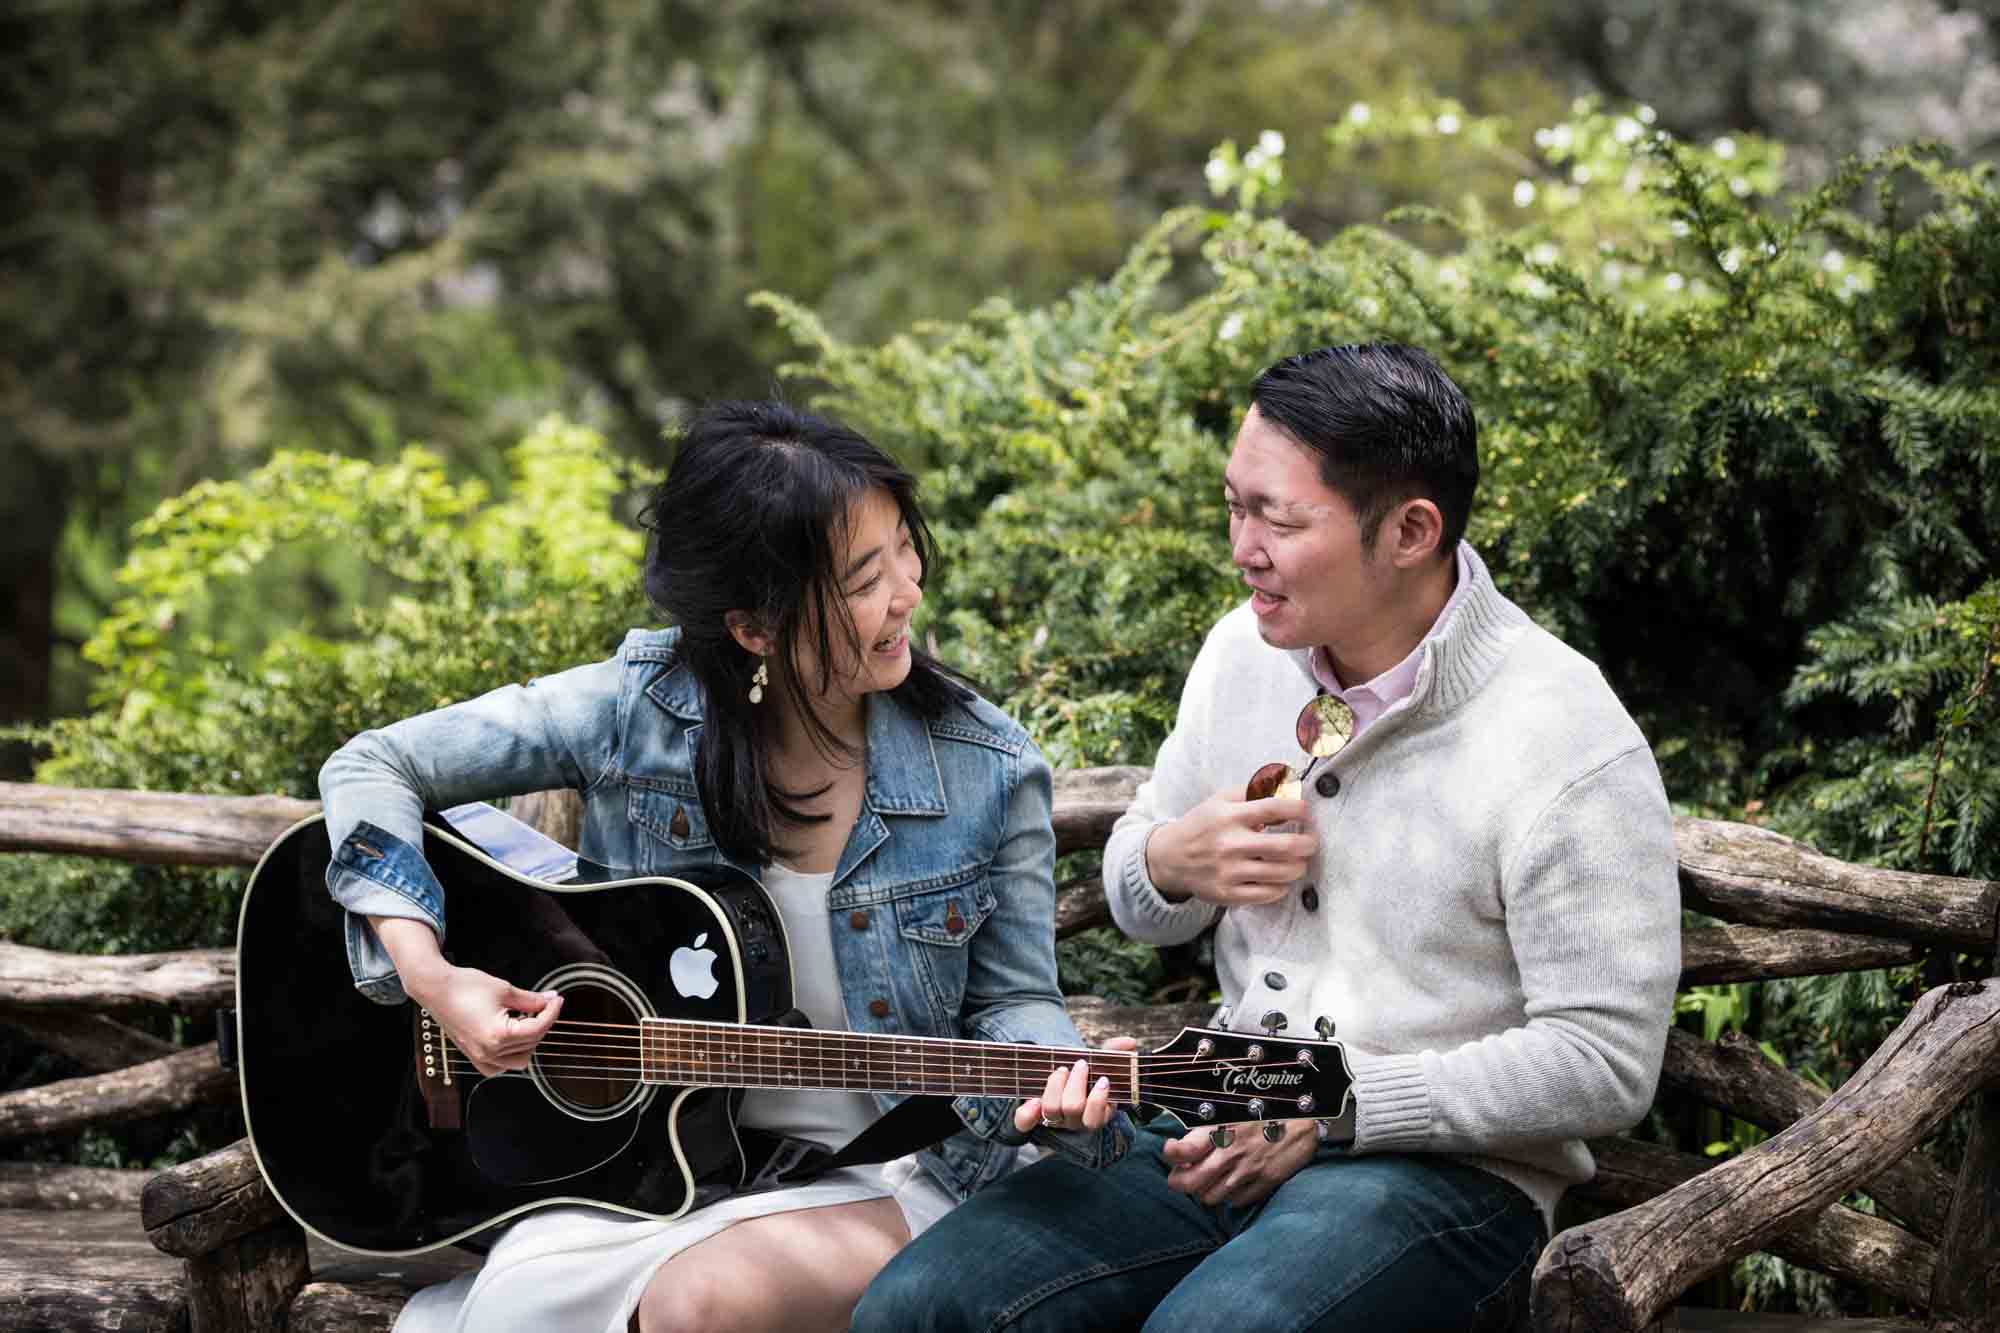 Man showing woman how to play guitar in Shakespeare Garden during engagement shoot